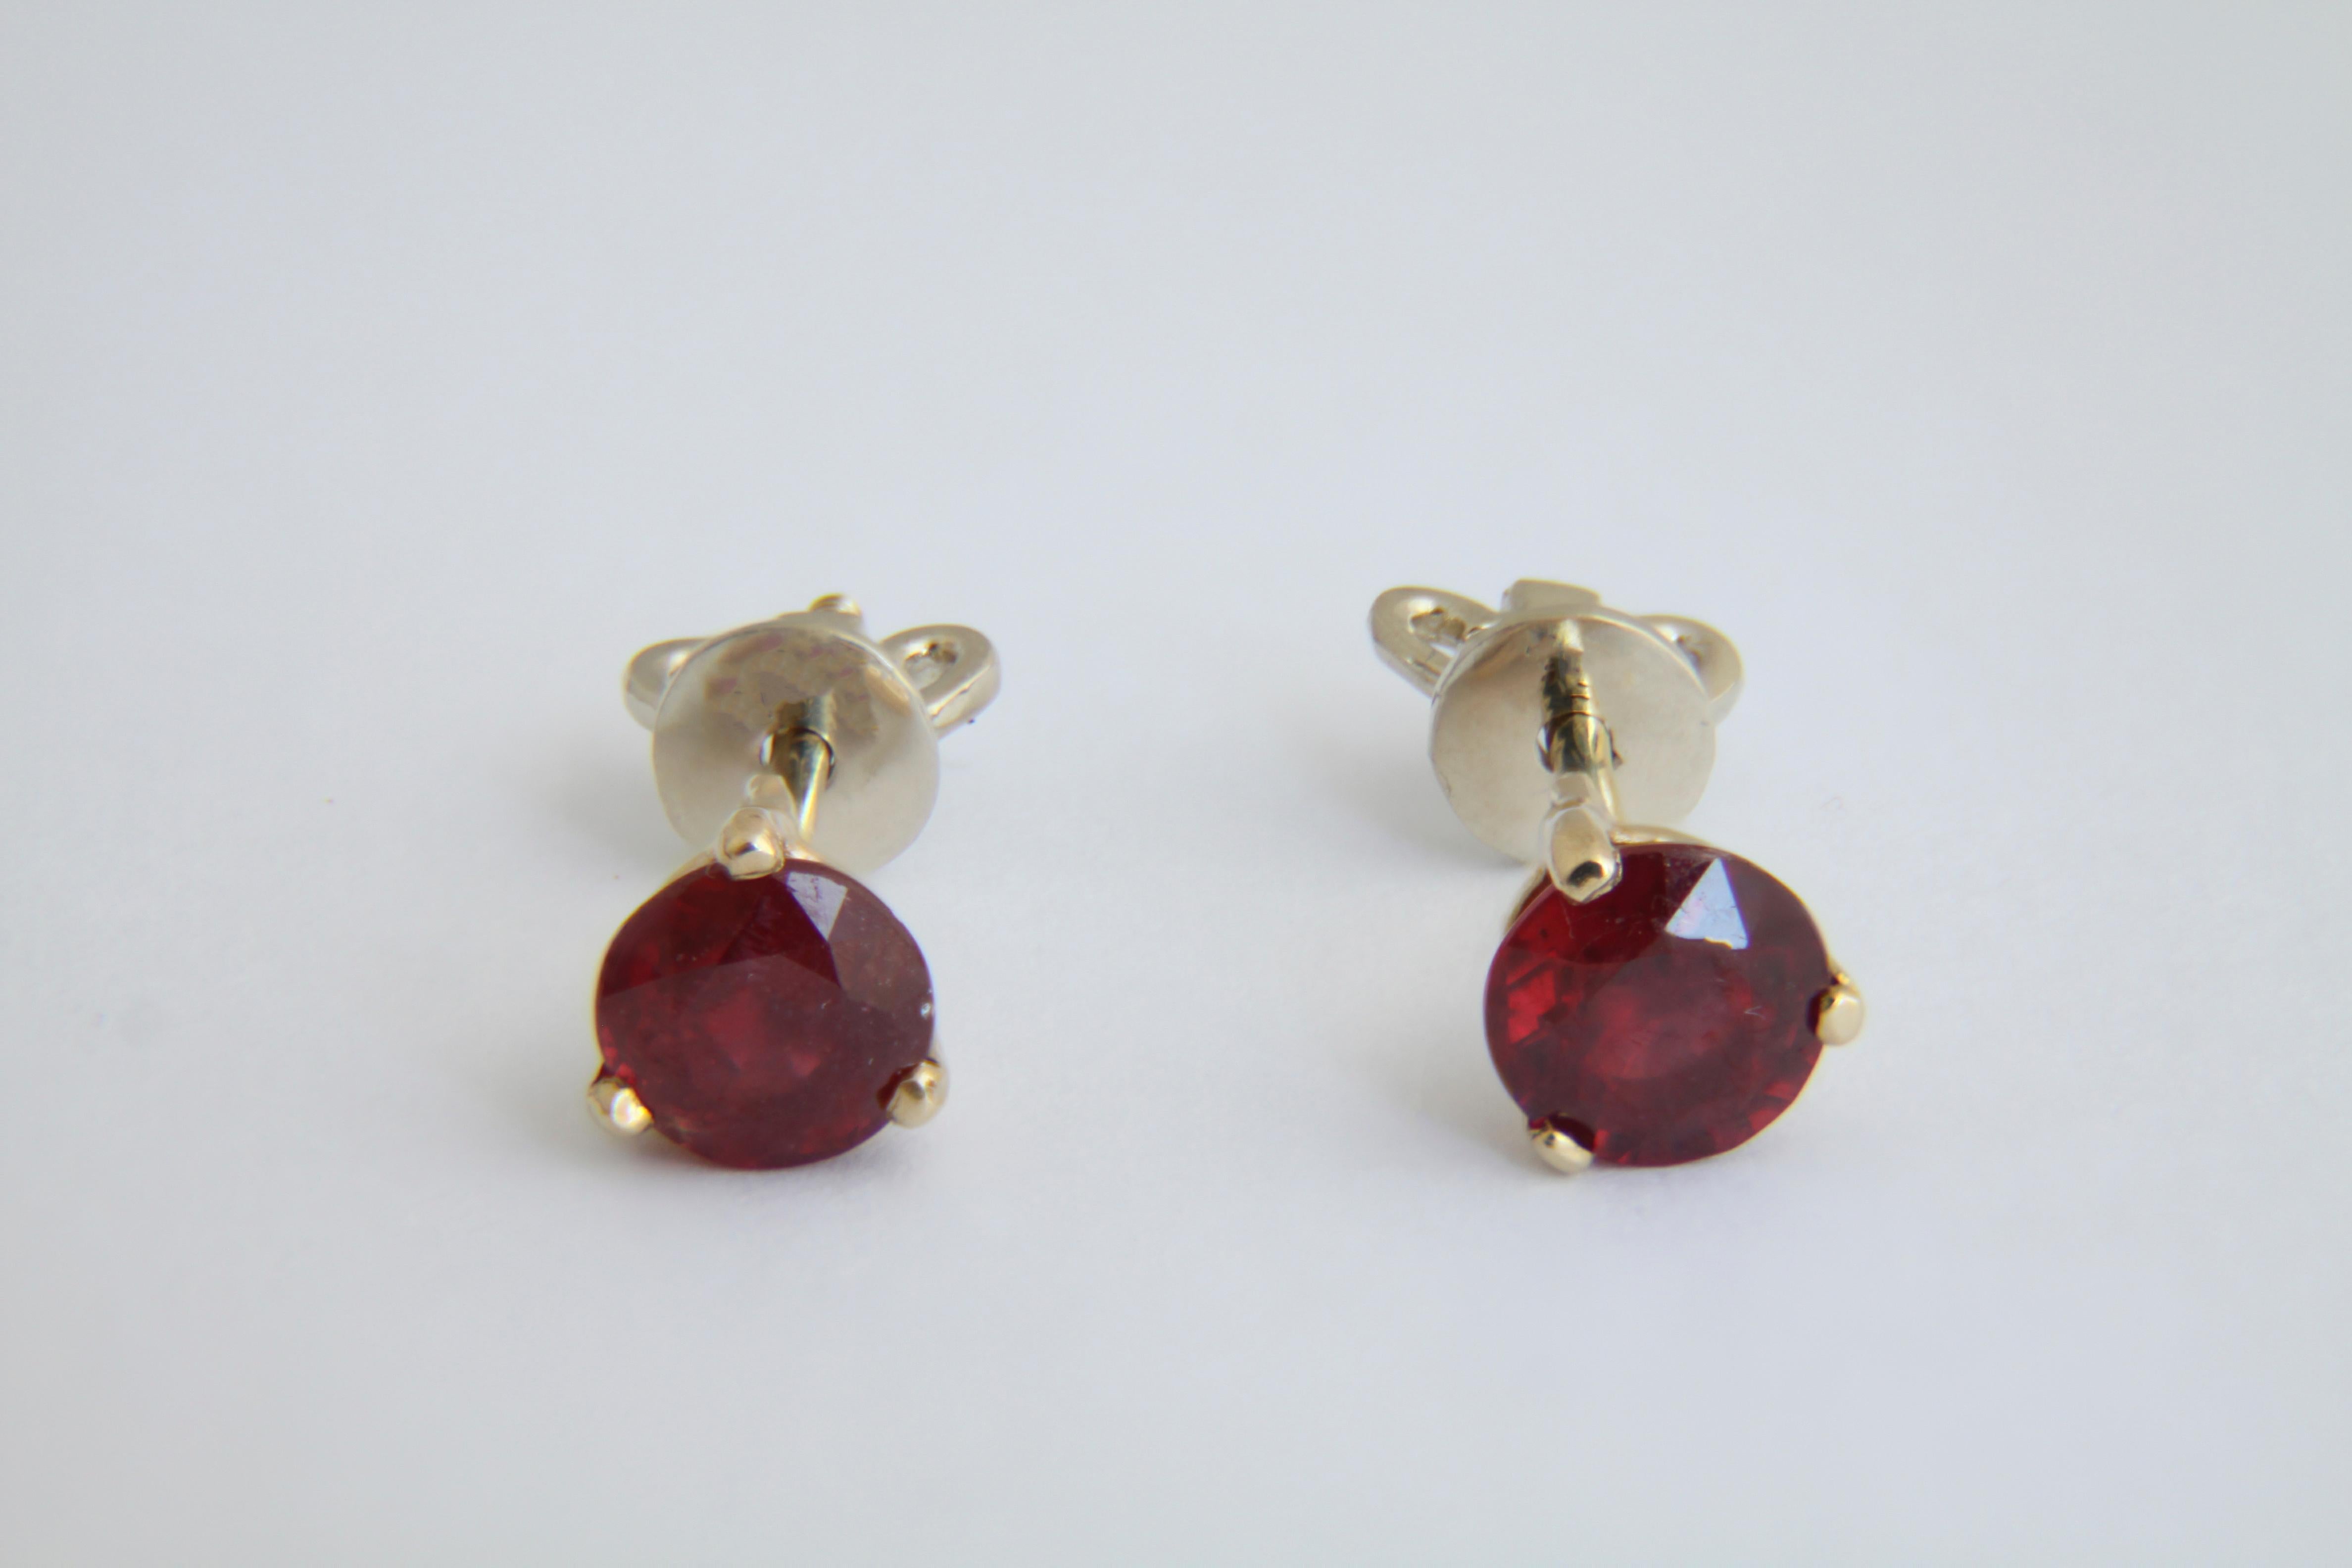 Natural ruby stud earrings. 14k solid gold earrings with rubies. July birthstone earrings. Red gemstone studs. Round ruby earrings. 

Metal type: 14kt solid gold
Weight: 2 gr
Central stones: Natural ruby
Cut: Round
size: 4-4.4mm
Total weight: 0.9